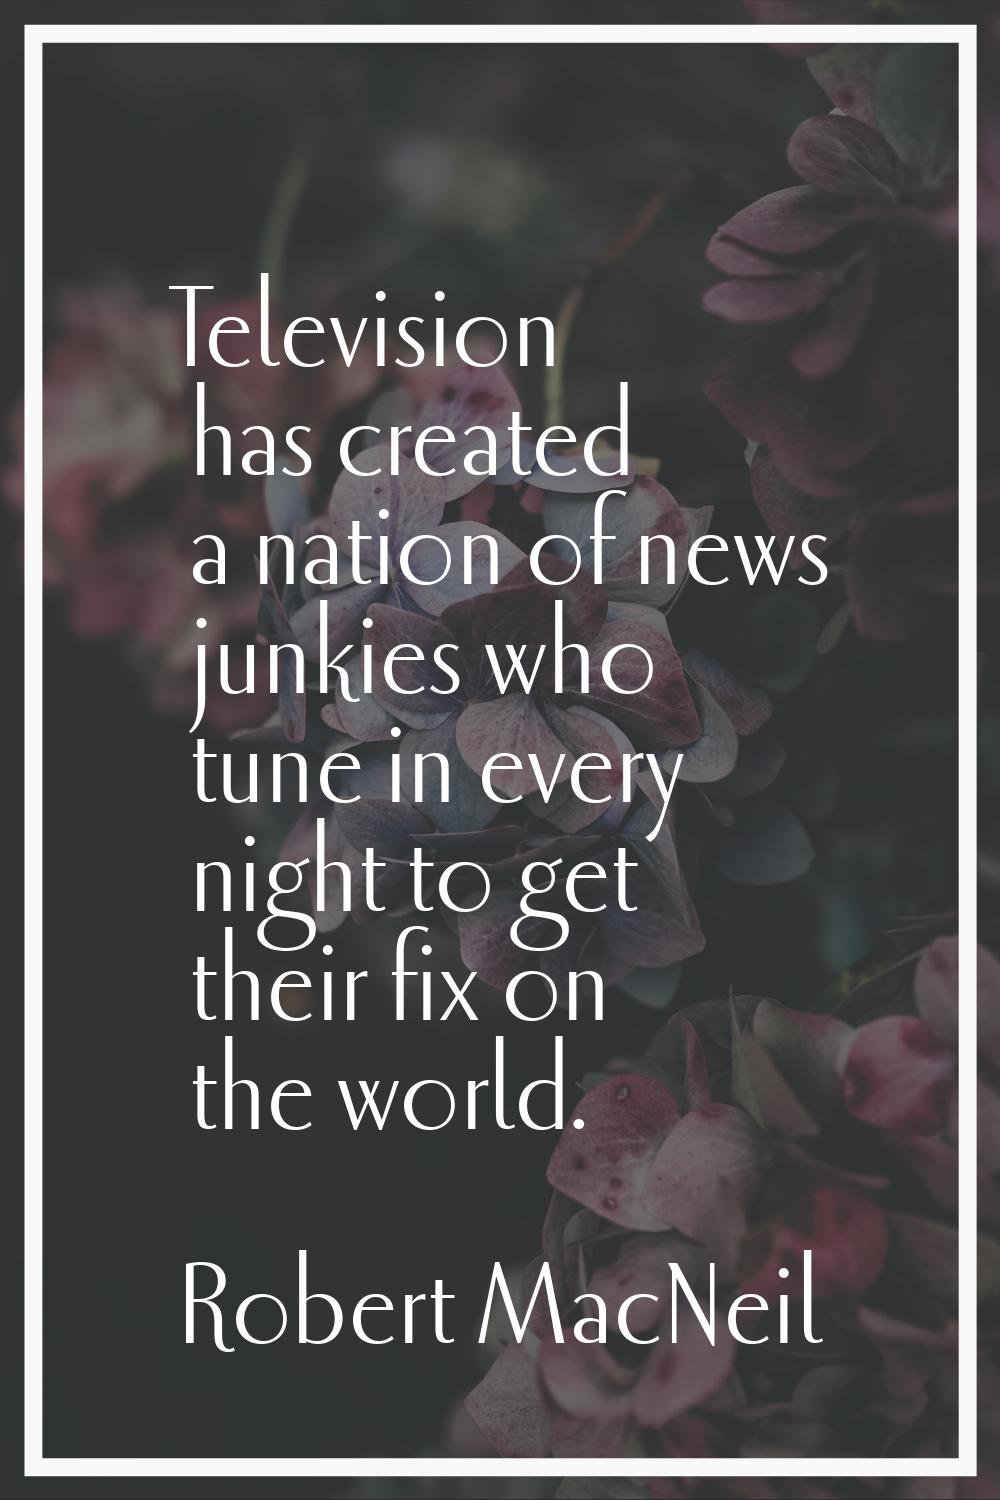 Television has created a nation of news junkies who tune in every night to get their fix on the wor